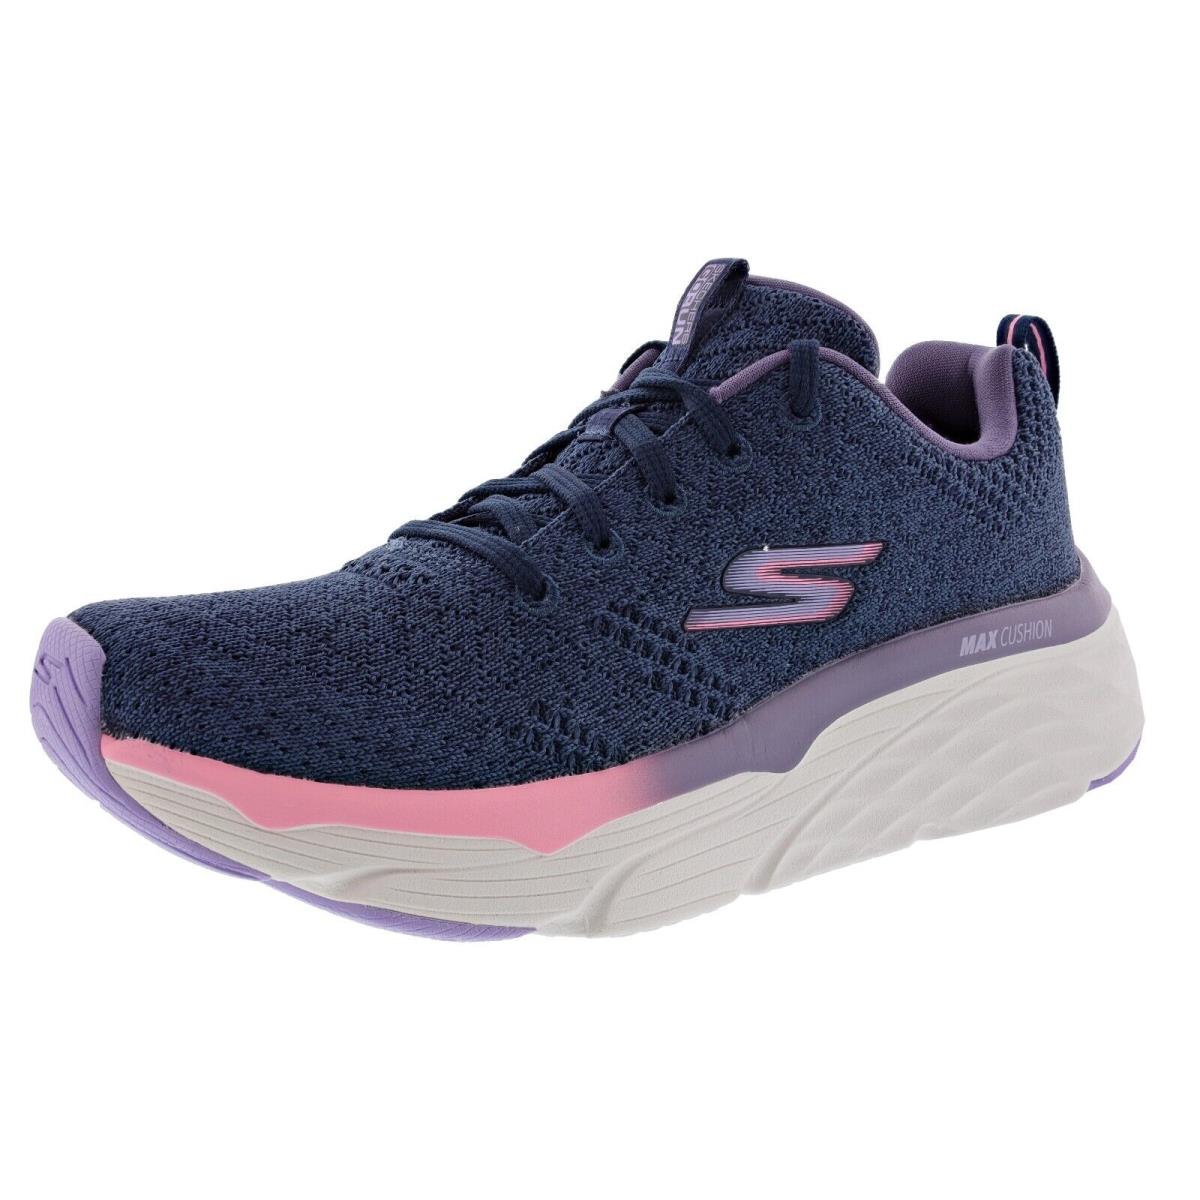 Skechers Women`s Max Cushioning Elite- Clarion Lace-up Running Shoes NAVY / PURPLE